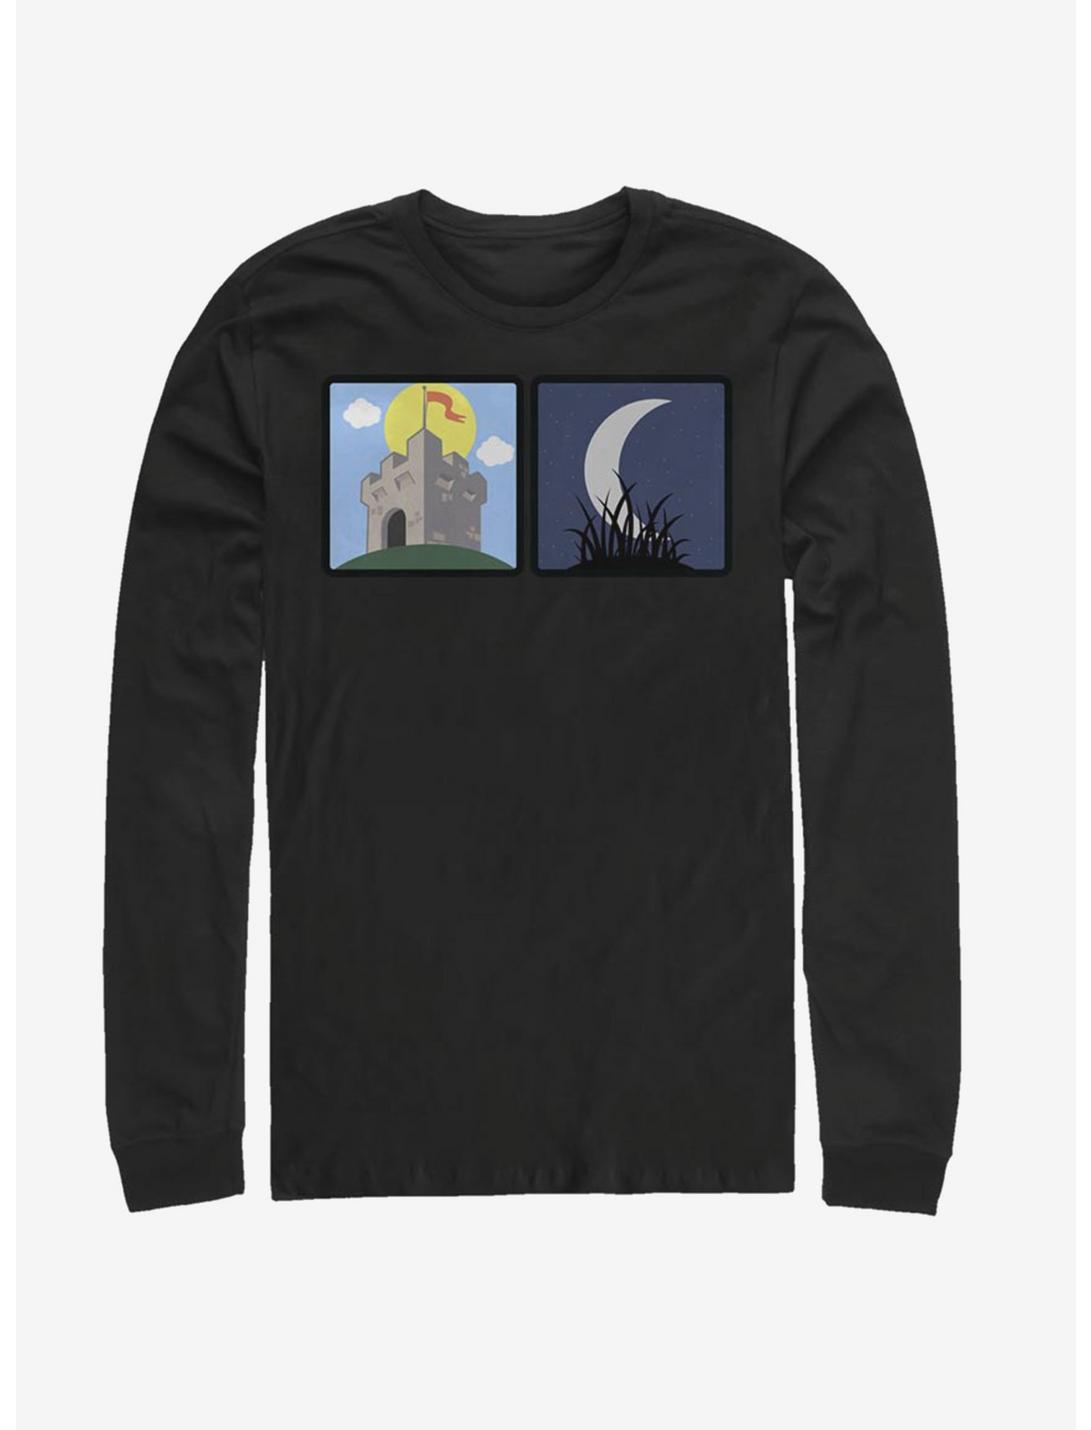 Fortress And Night Time Long-Sleeve T-Shirt, BLACK, hi-res